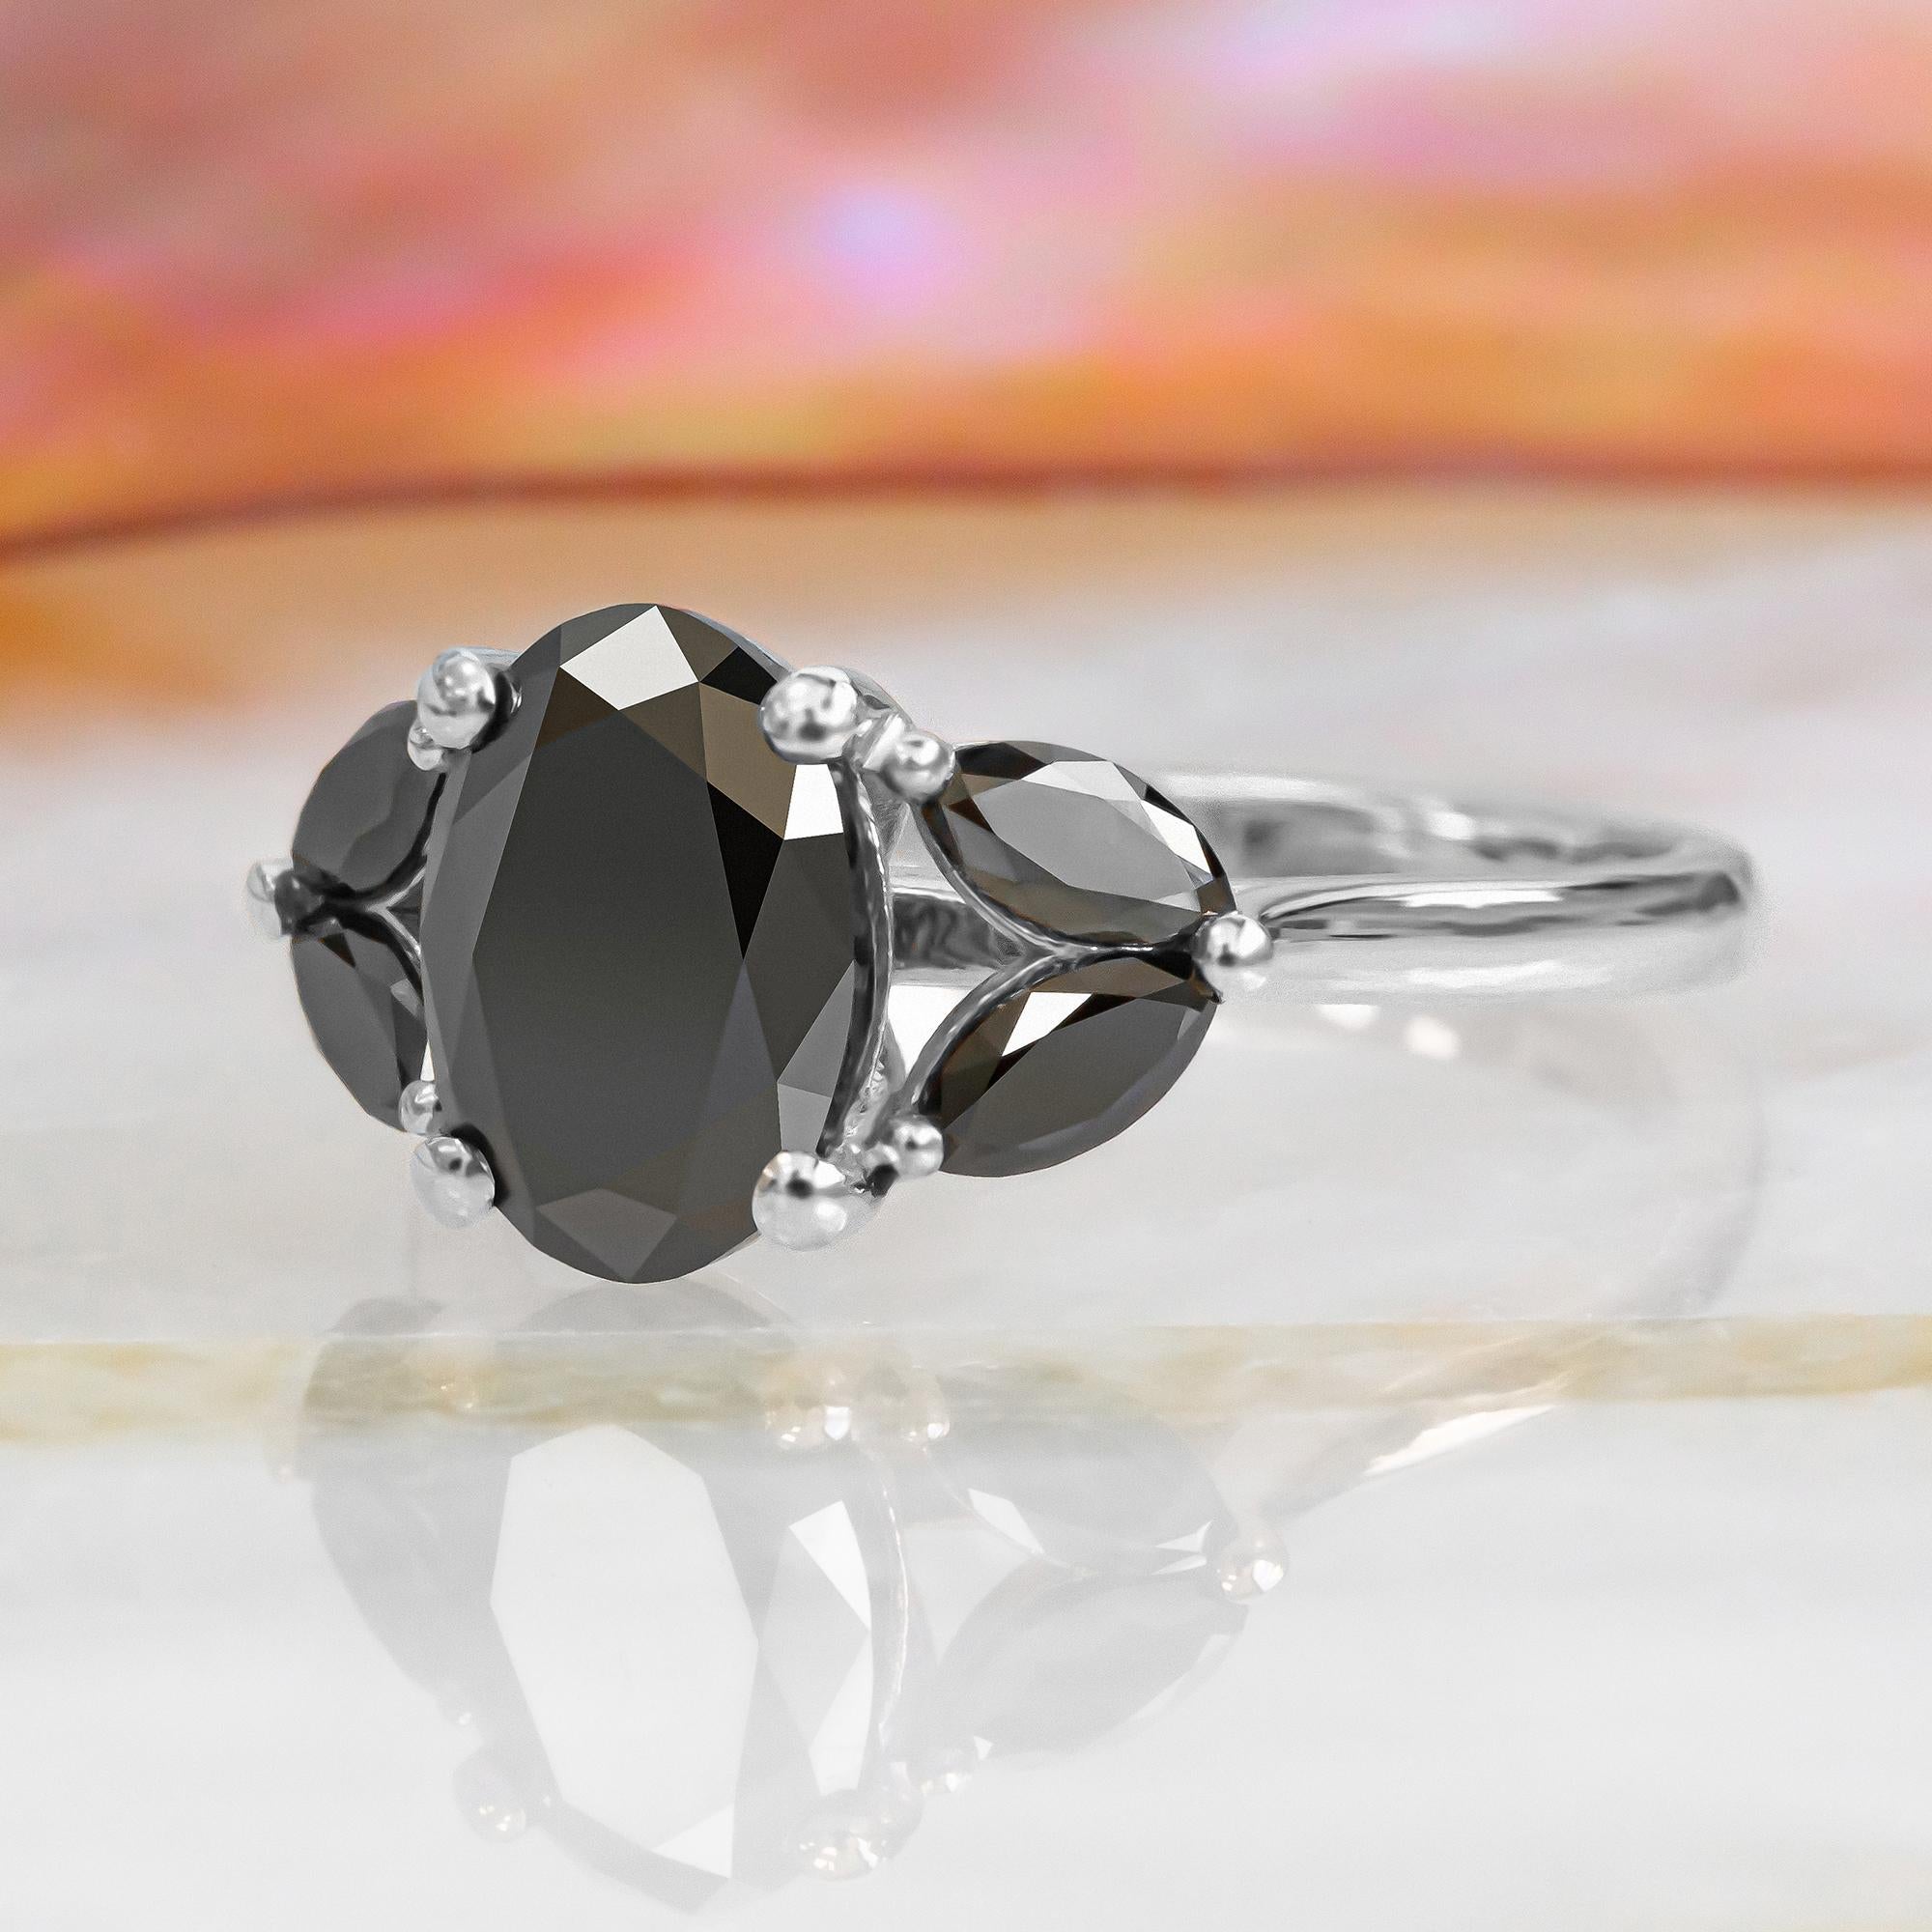 -Total Carat Weight: 2.6 Carats
-14K White Gold
-Size: Resizable

Notes:
- All diamonds are natural, earth-mined diamonds that were suitable for Color Enhancement into Fancy Black color.
- All Jewelry are made to order hence any size and gold colors